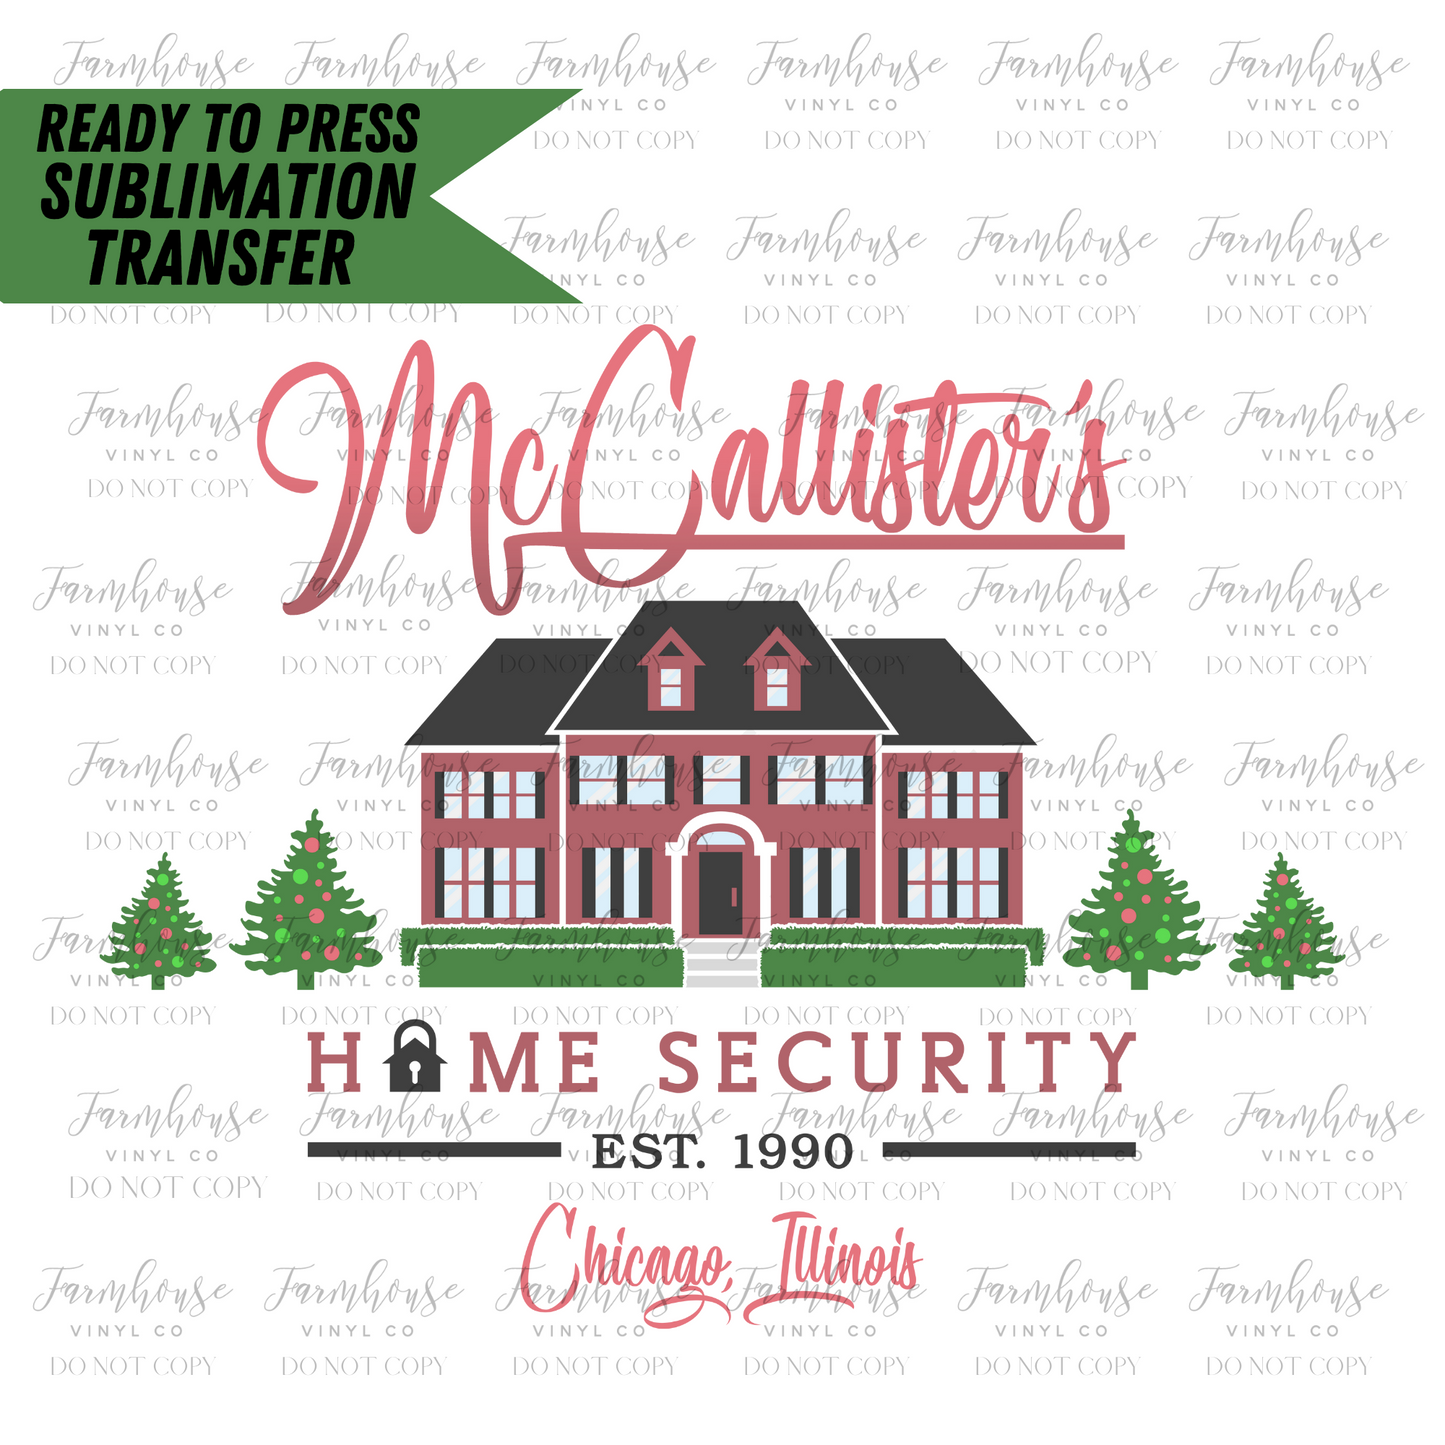 Mccallisters Home Security  Ready To Press Sublimation Transfer Design - Farmhouse Vinyl Co